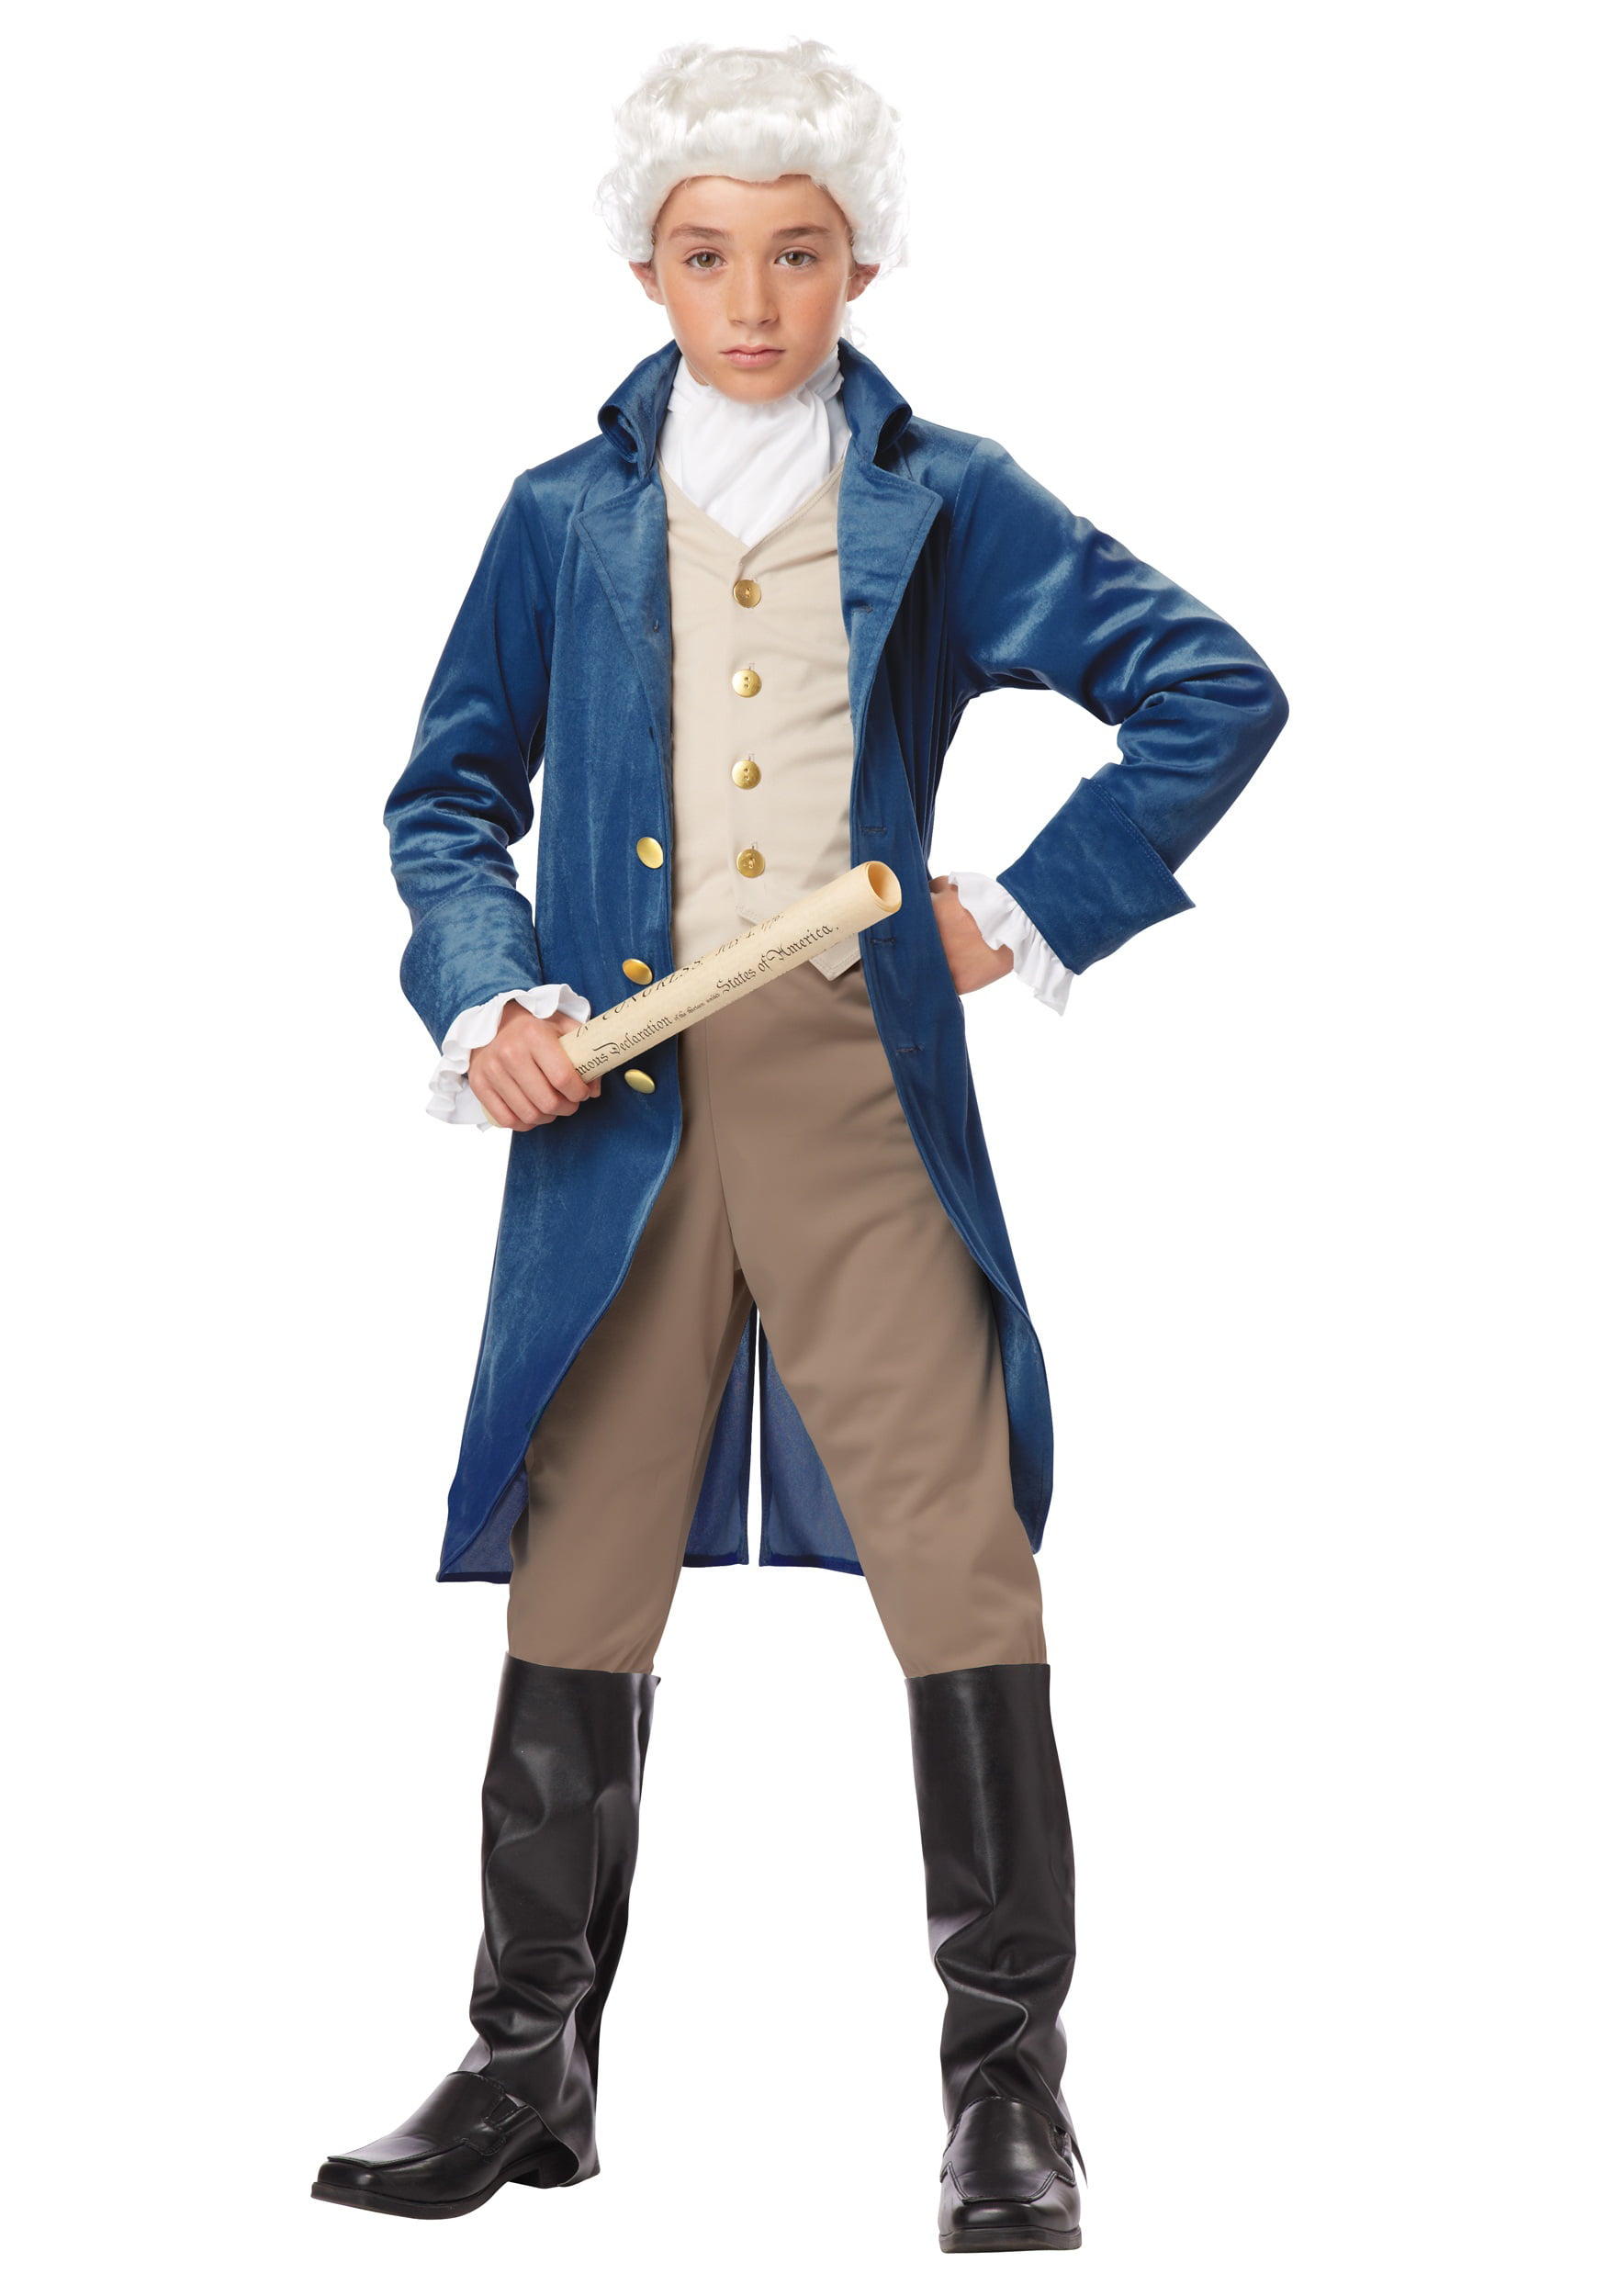 Details about   George Washington Childs Costume